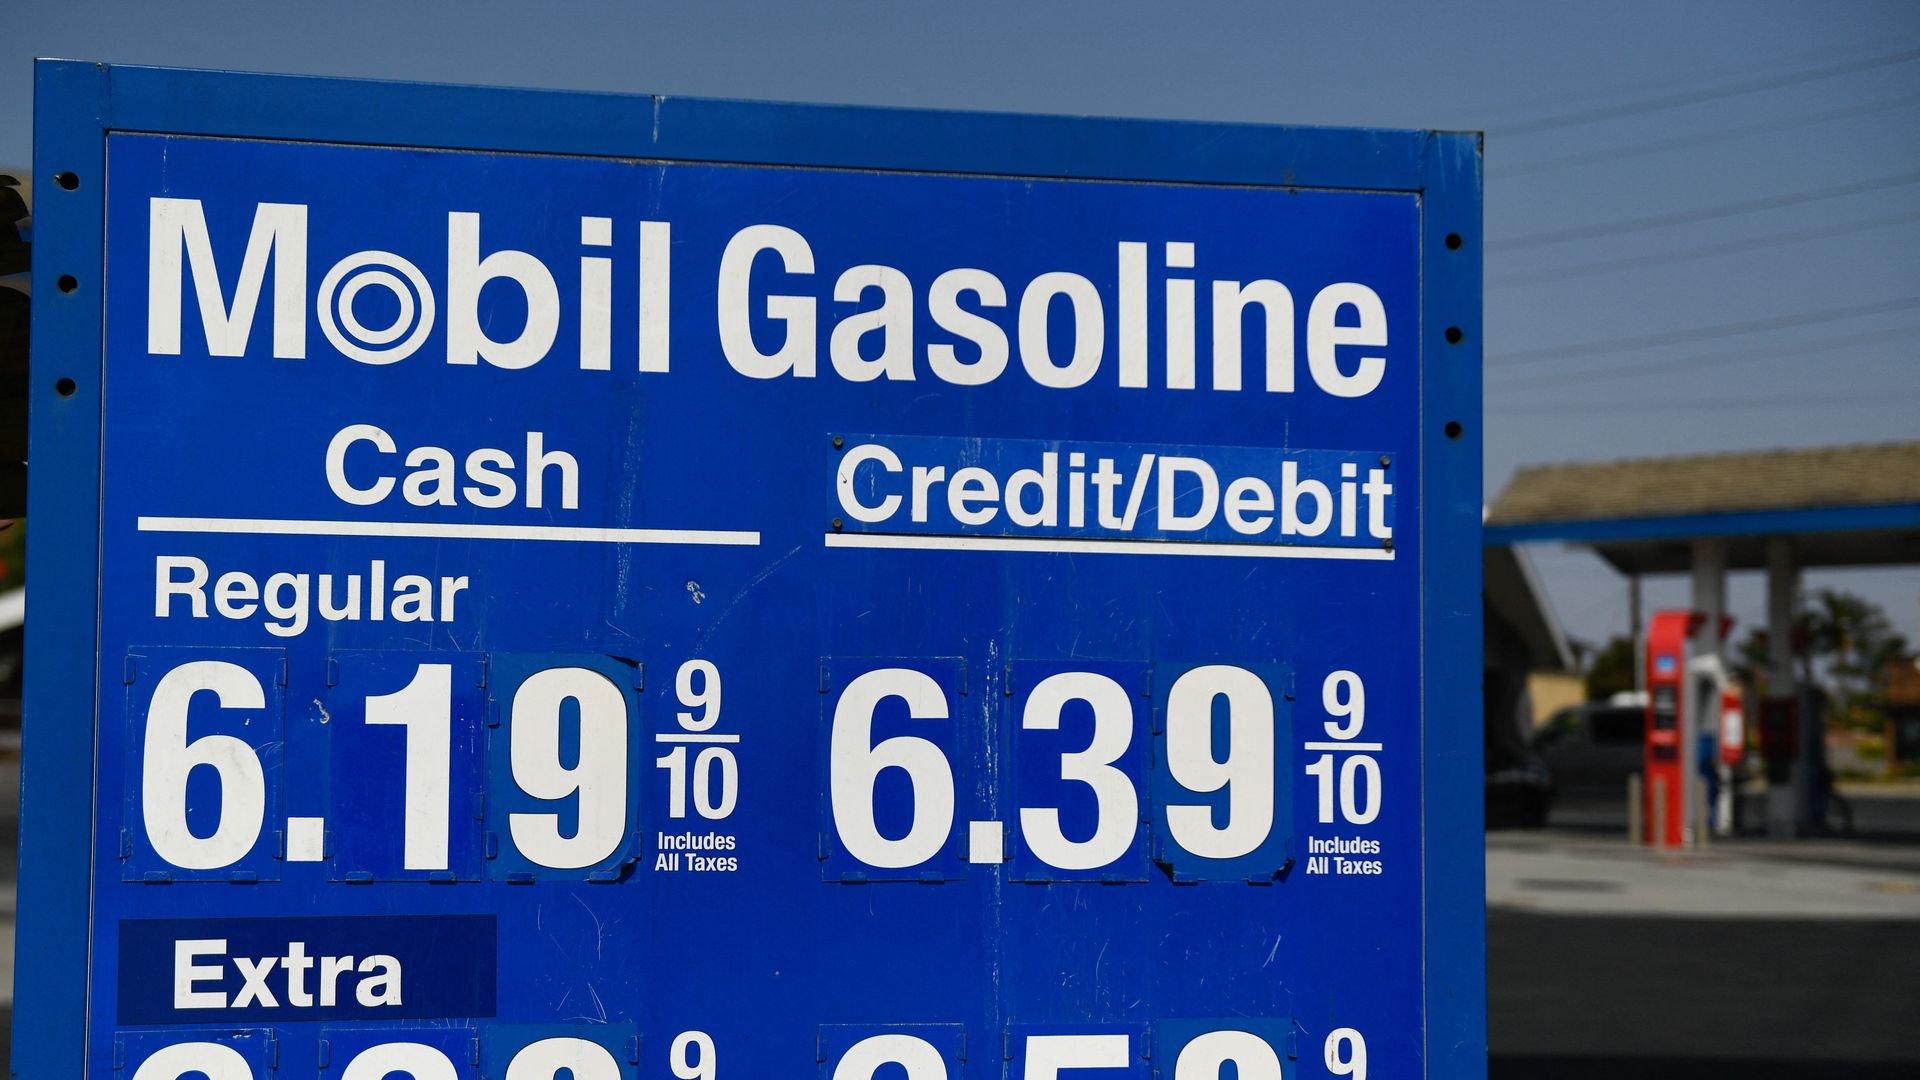 High gas prices are affecting U.S. consumers.